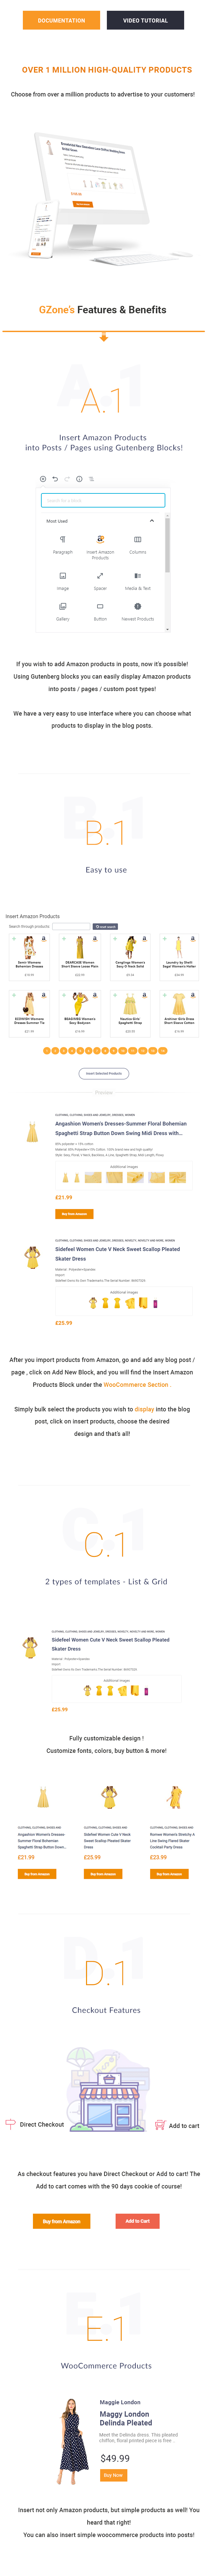 GZone - Insert Amazon / WooCommerce Products into Posts / Pages - 1